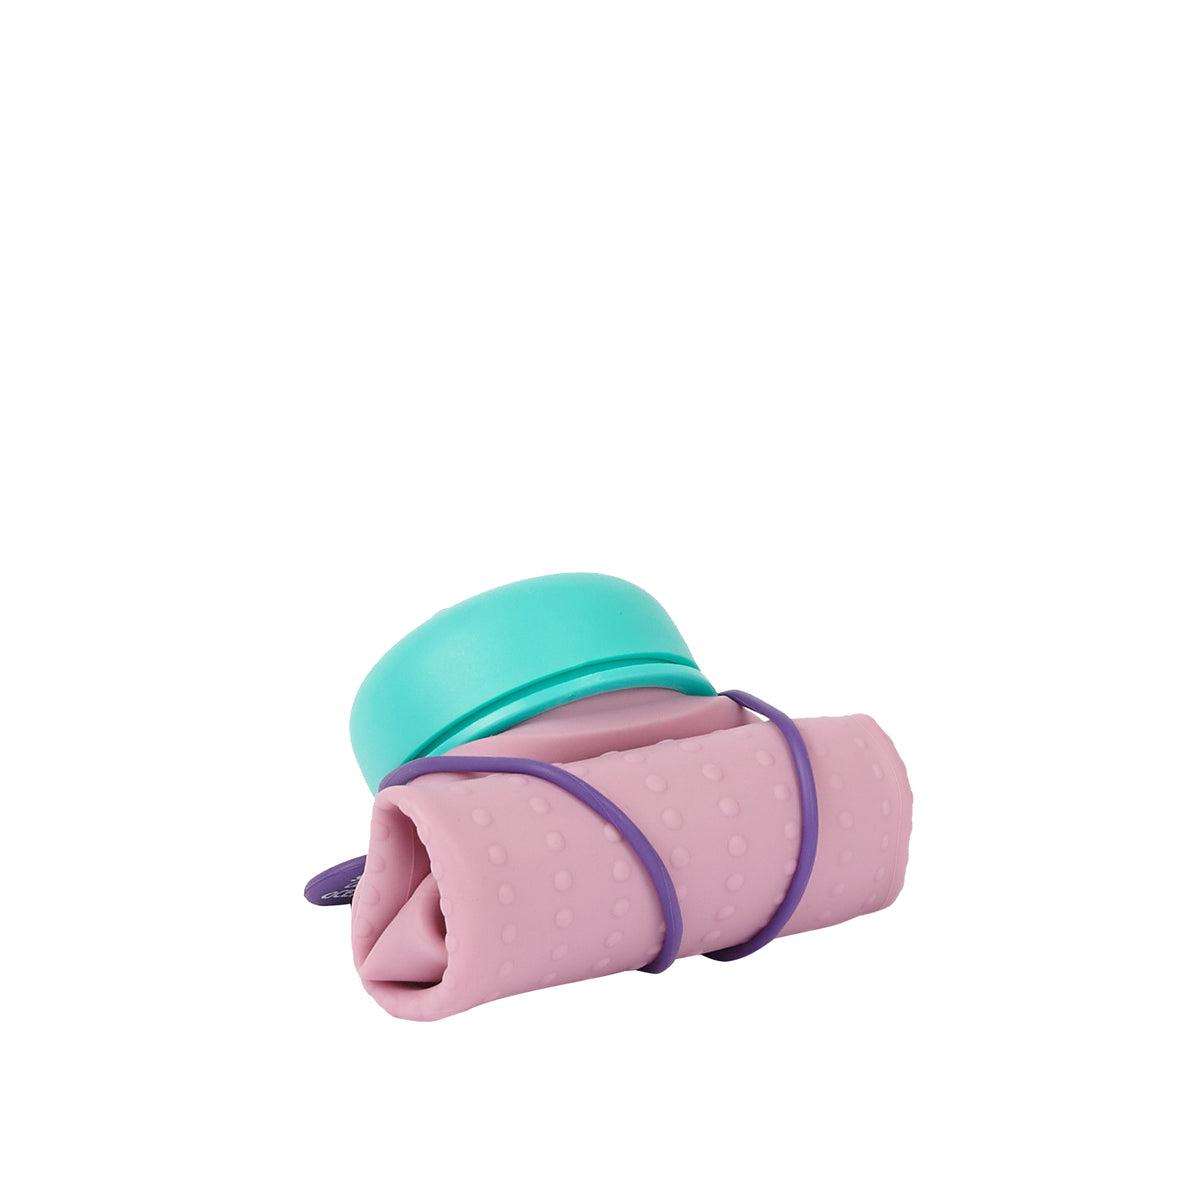 Rolla Bottle - Pink Lilac, Teal Lid + Purple Strap - rolled